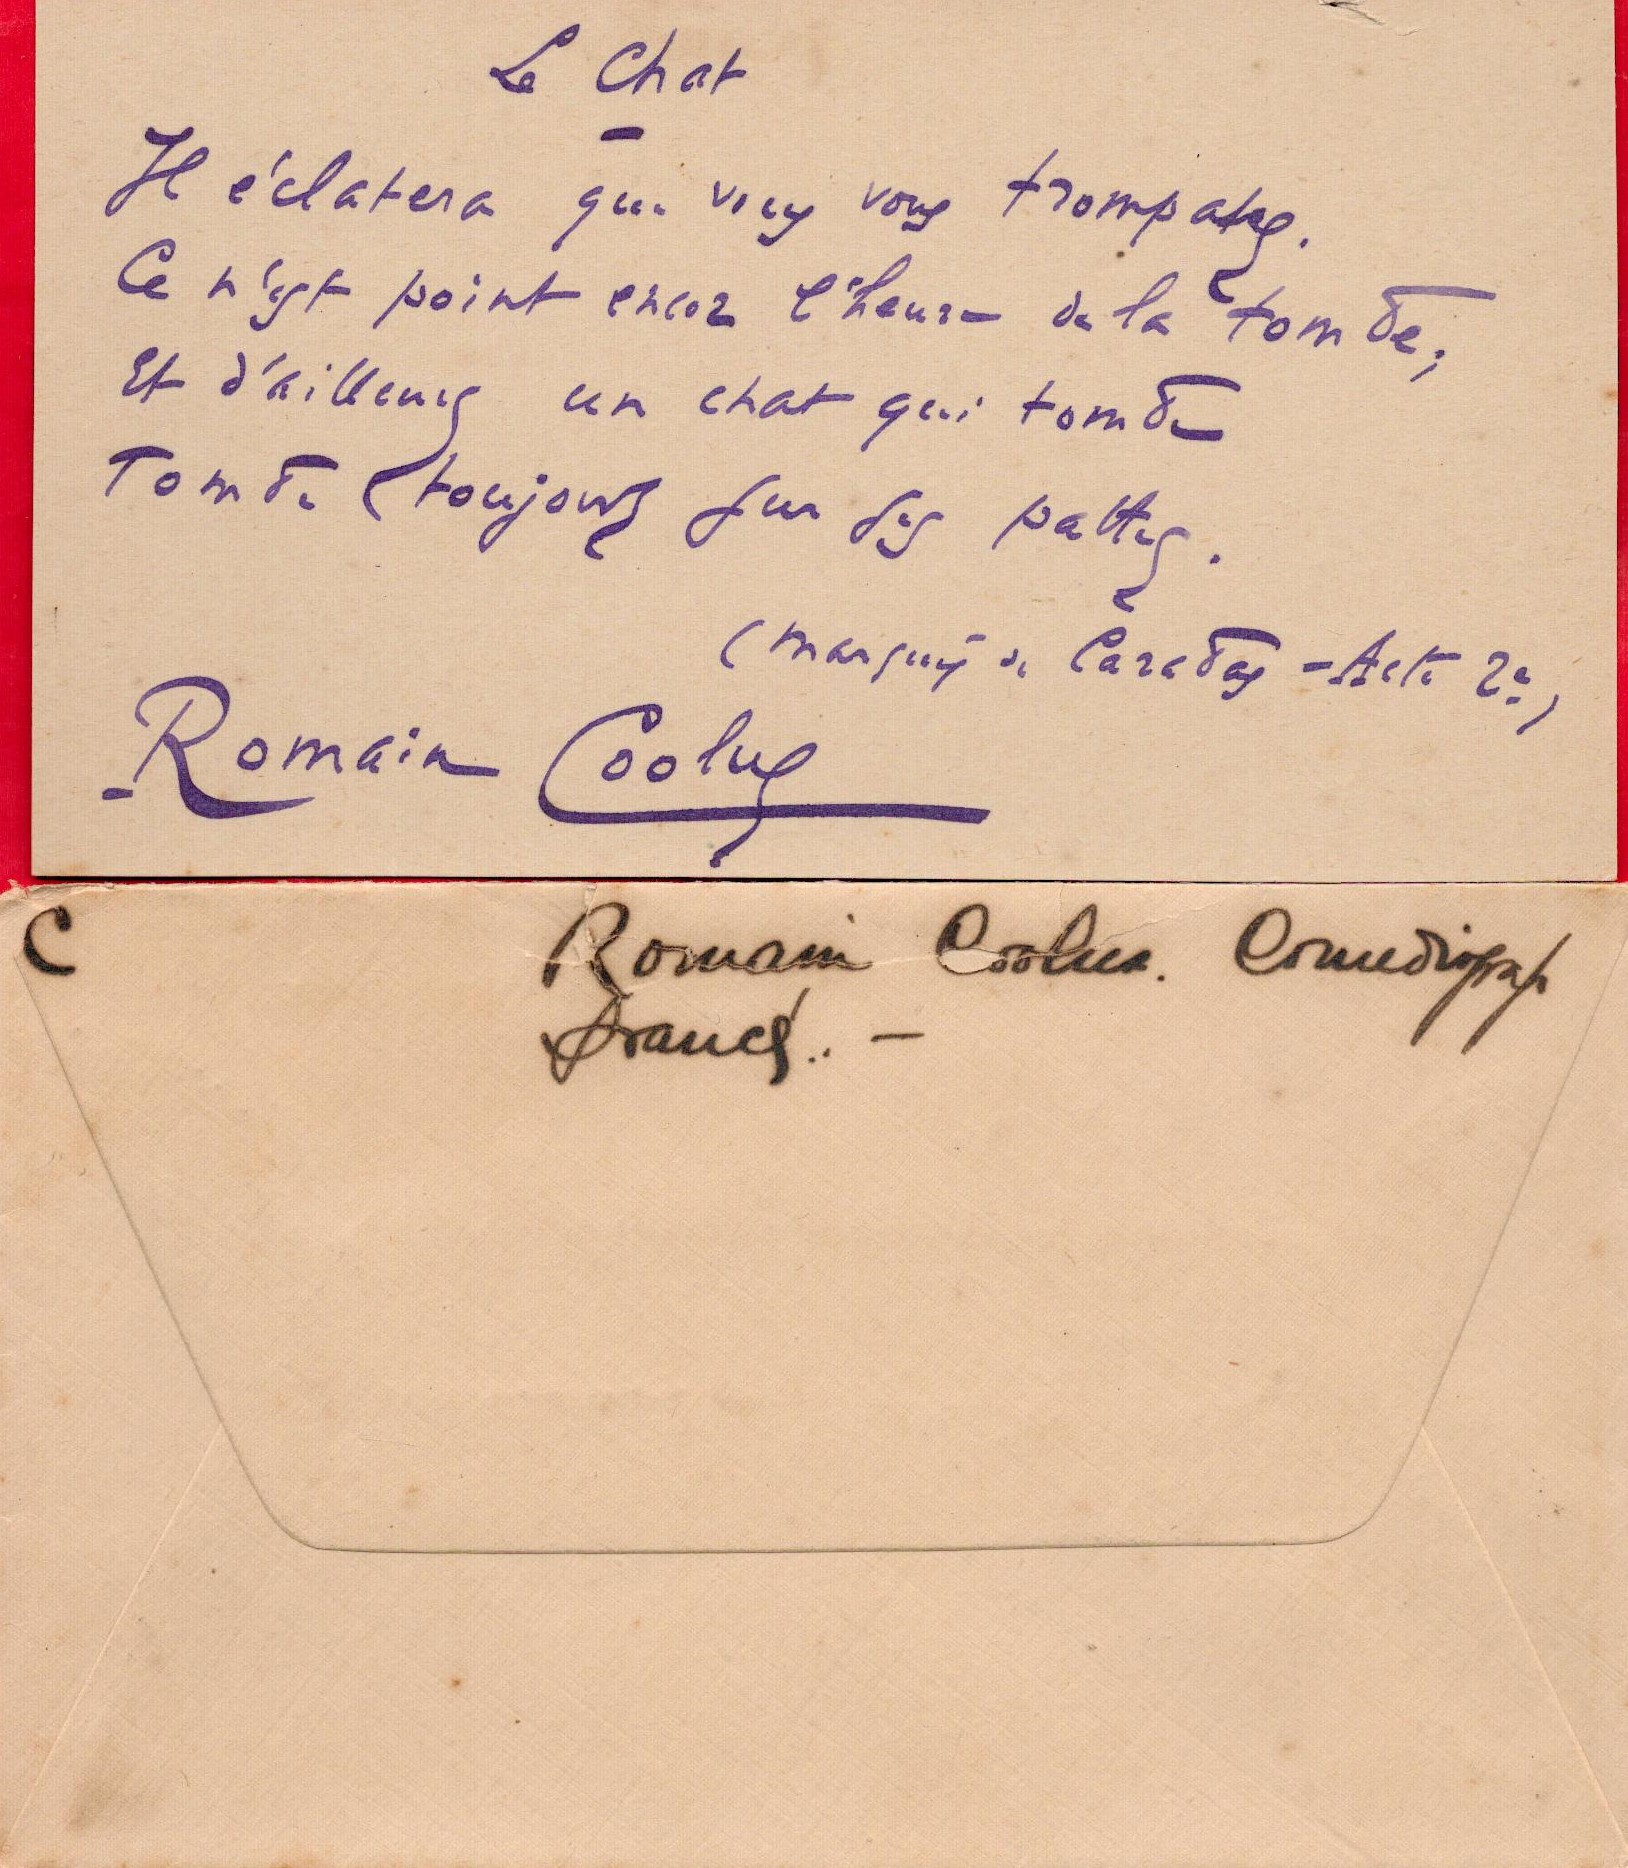 Romain Coolus signed 5x3 card. René Max Weill (25 May 1868 - 9 September 1952), who used the